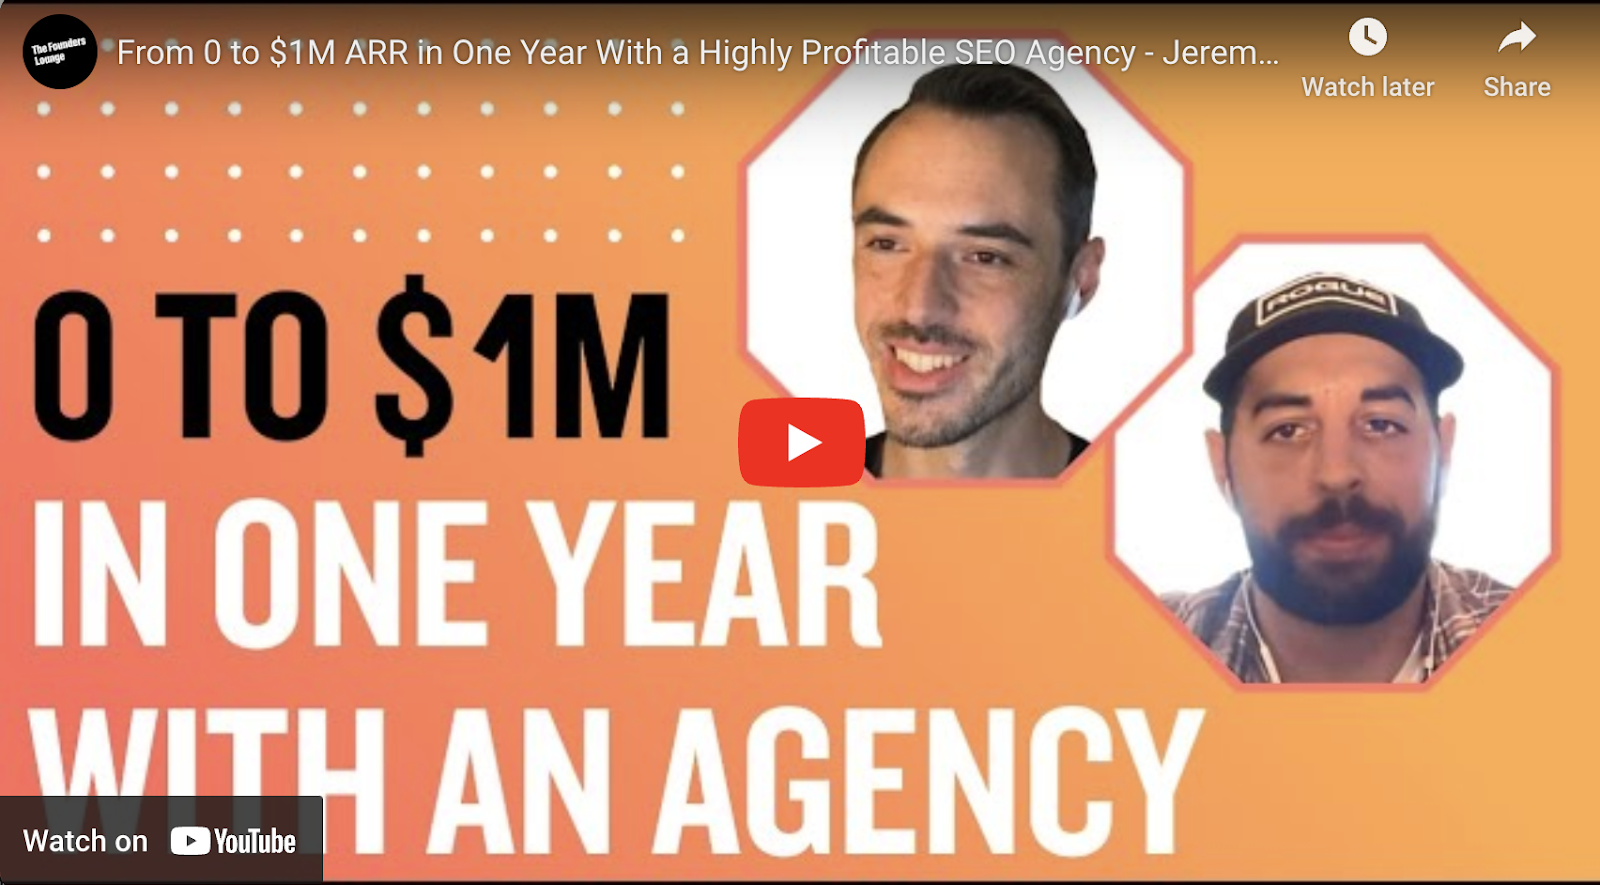 Podcast of Jeremy Moser explaining uSERP's agency growth tactics. 